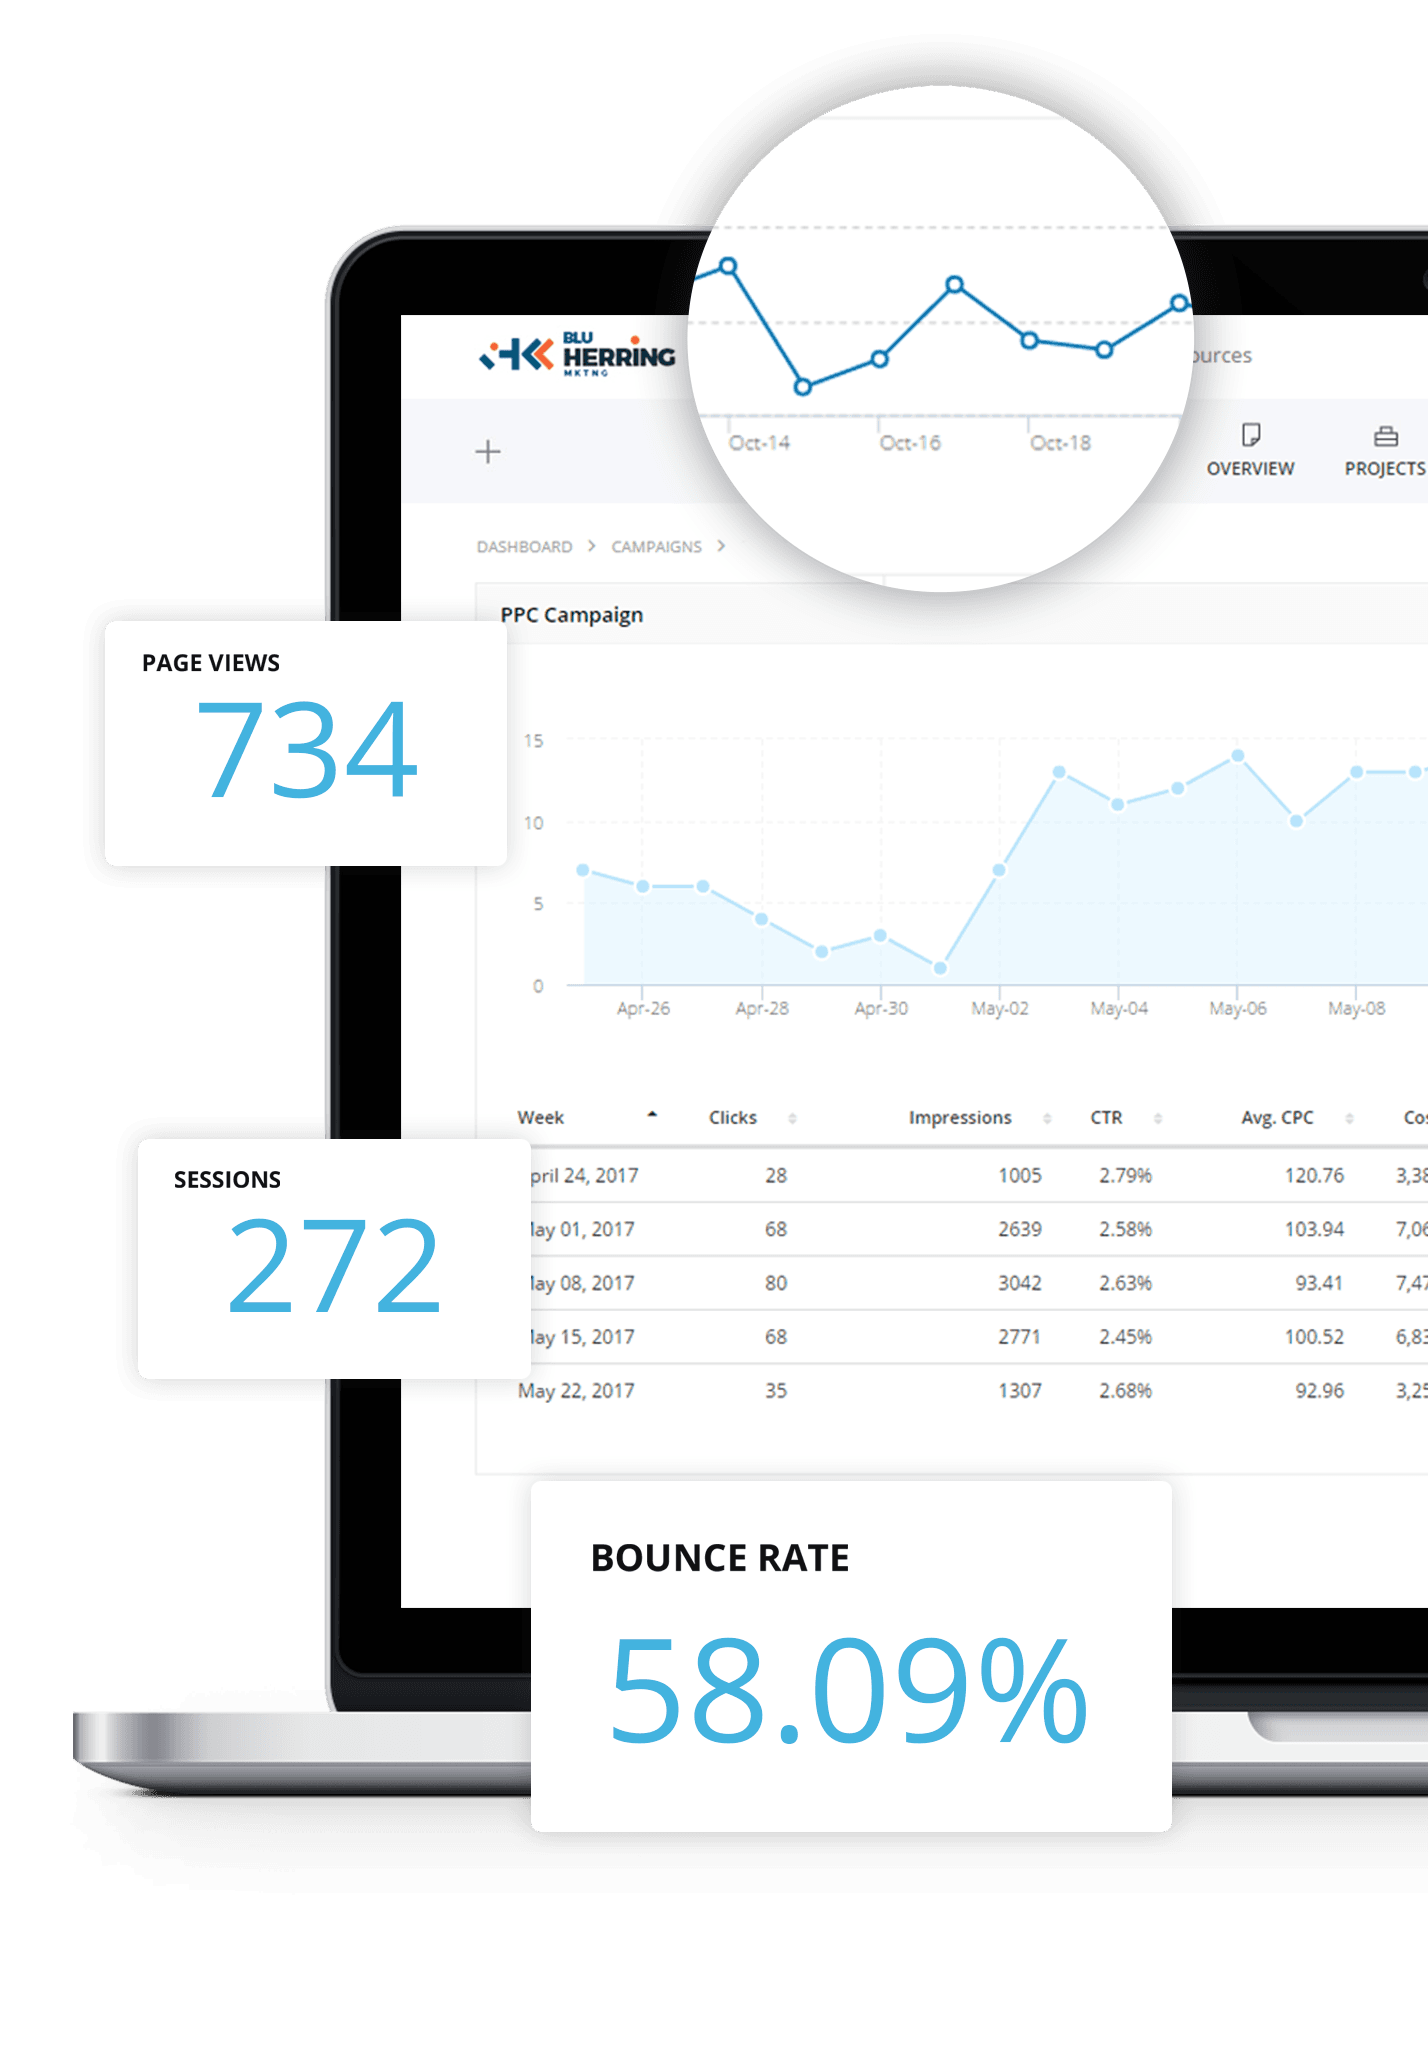 Mixed Media Ventures a Business Growth Digital Marketing Agency - PPC Dashboard